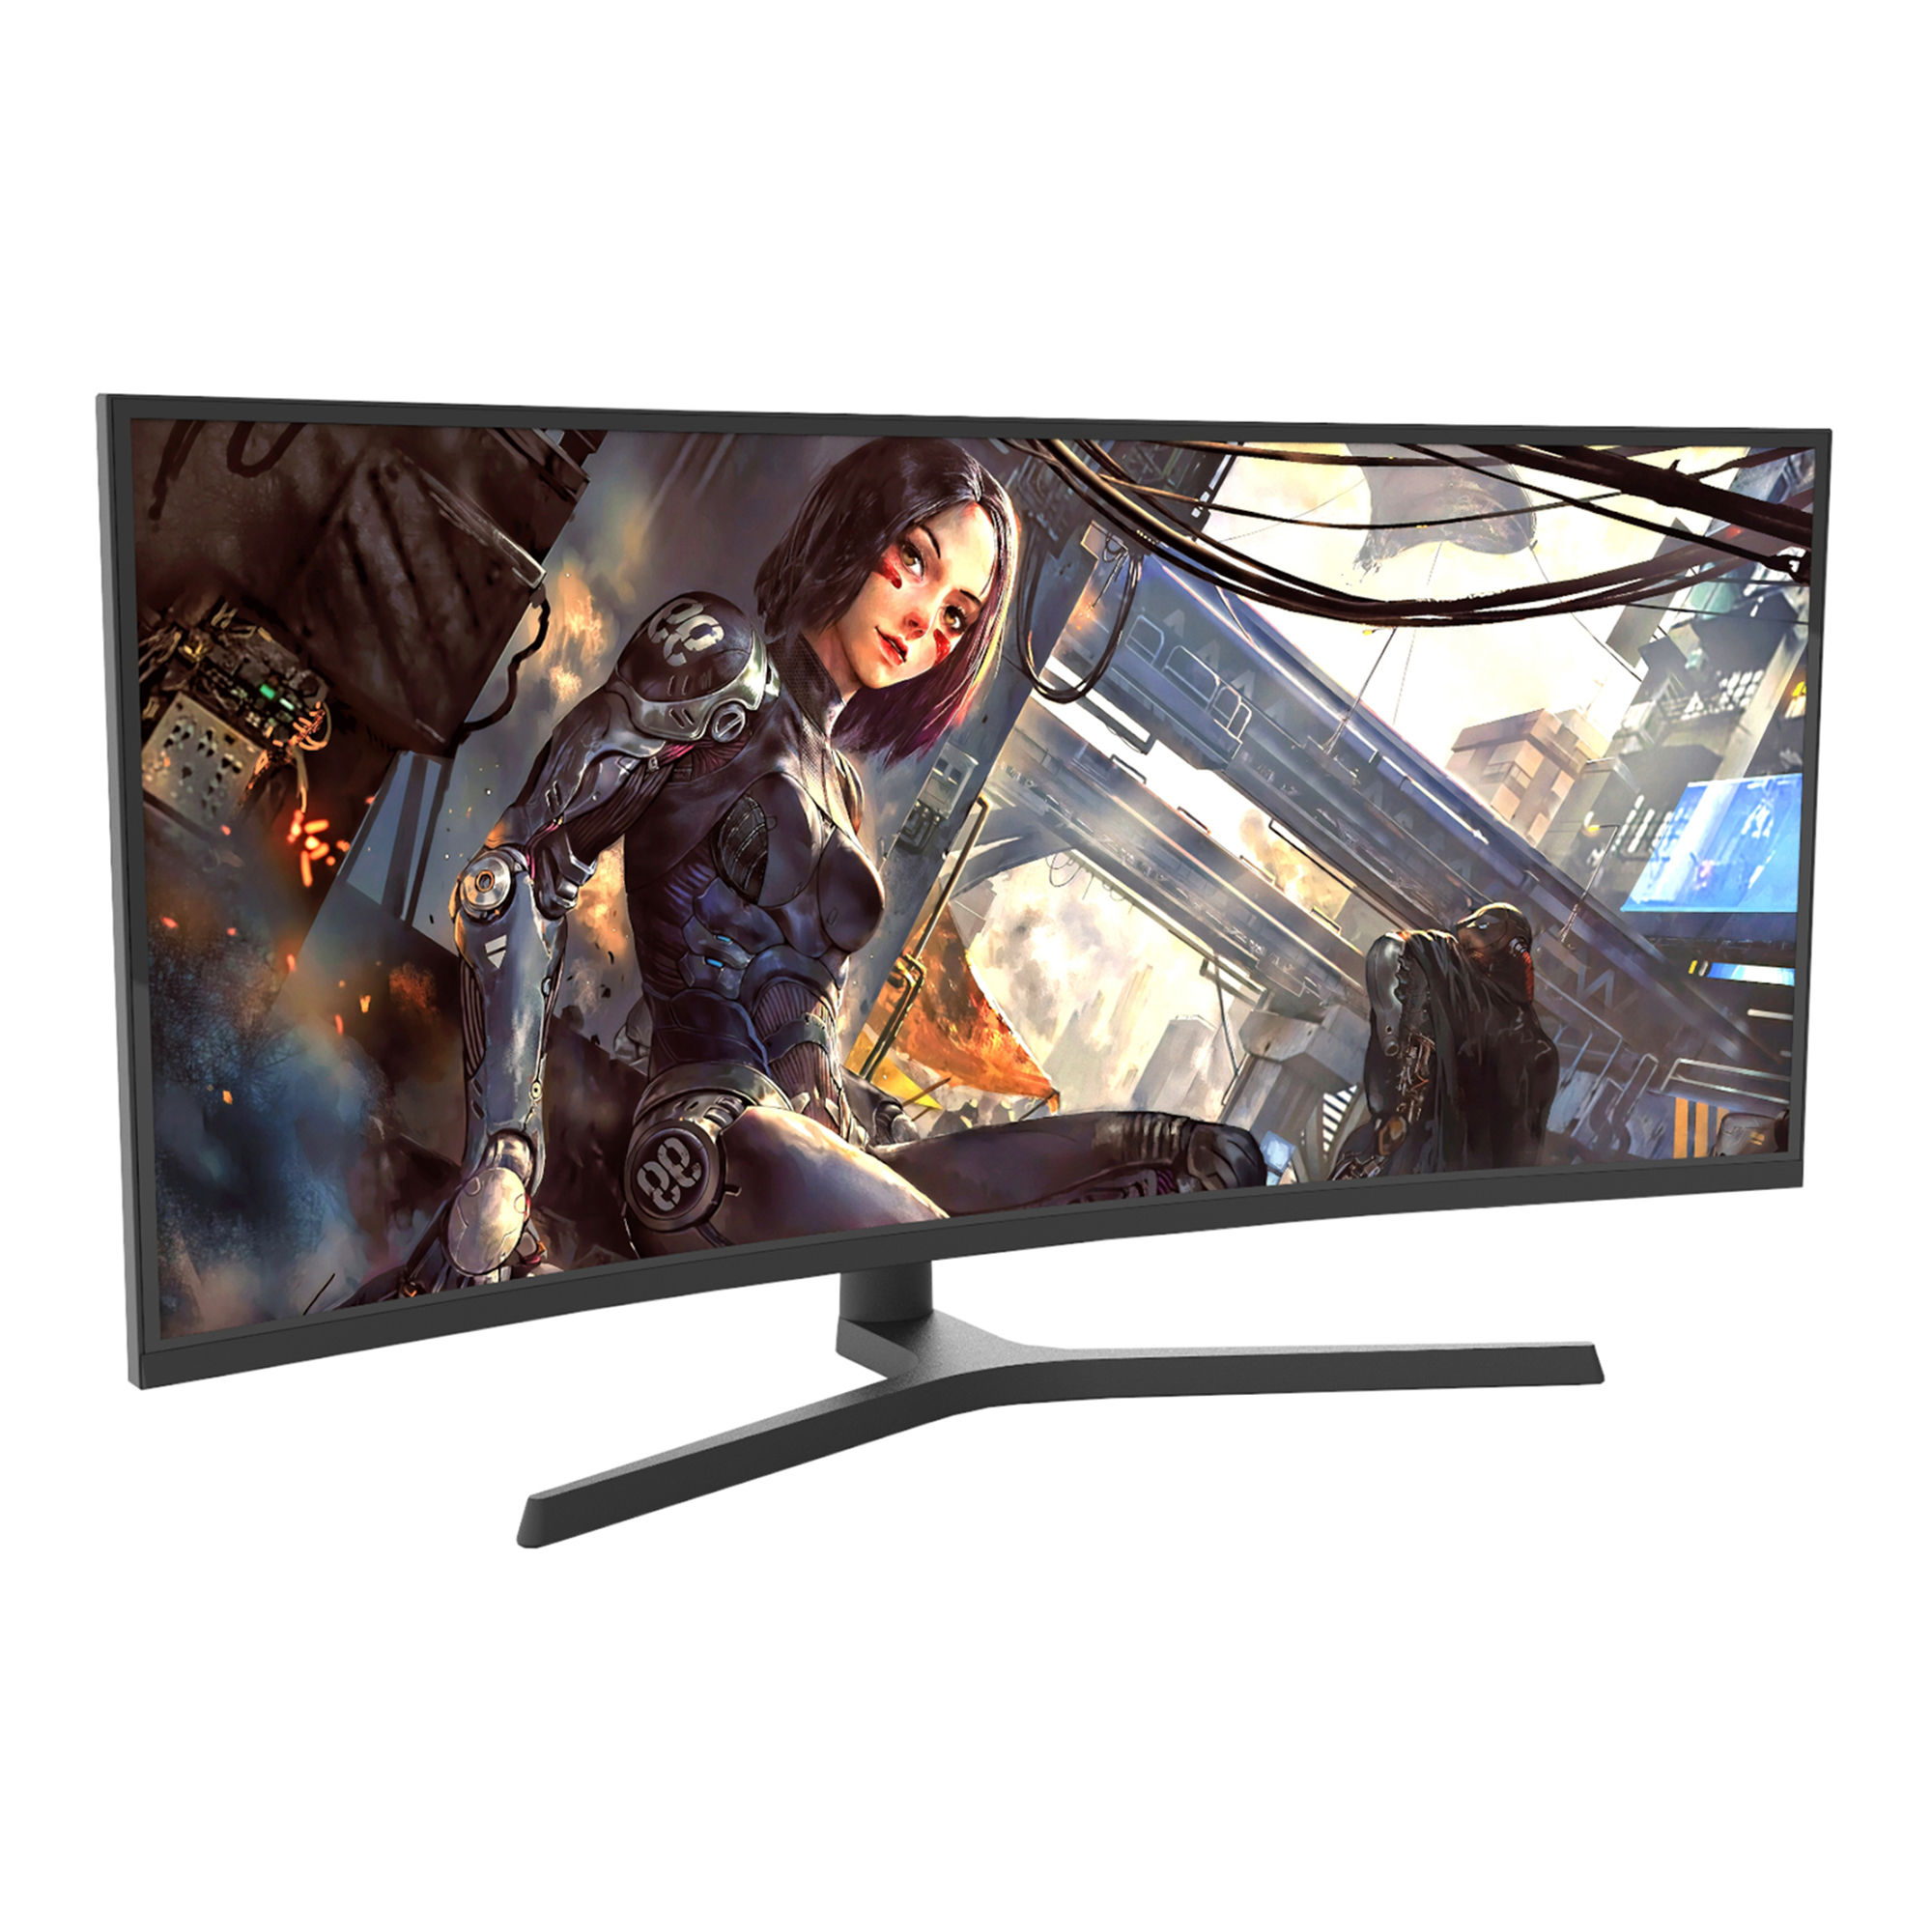 Monitor Gaming Curvo Mio-lcd 34'' Led 1440p 170hz 1ms - PcService